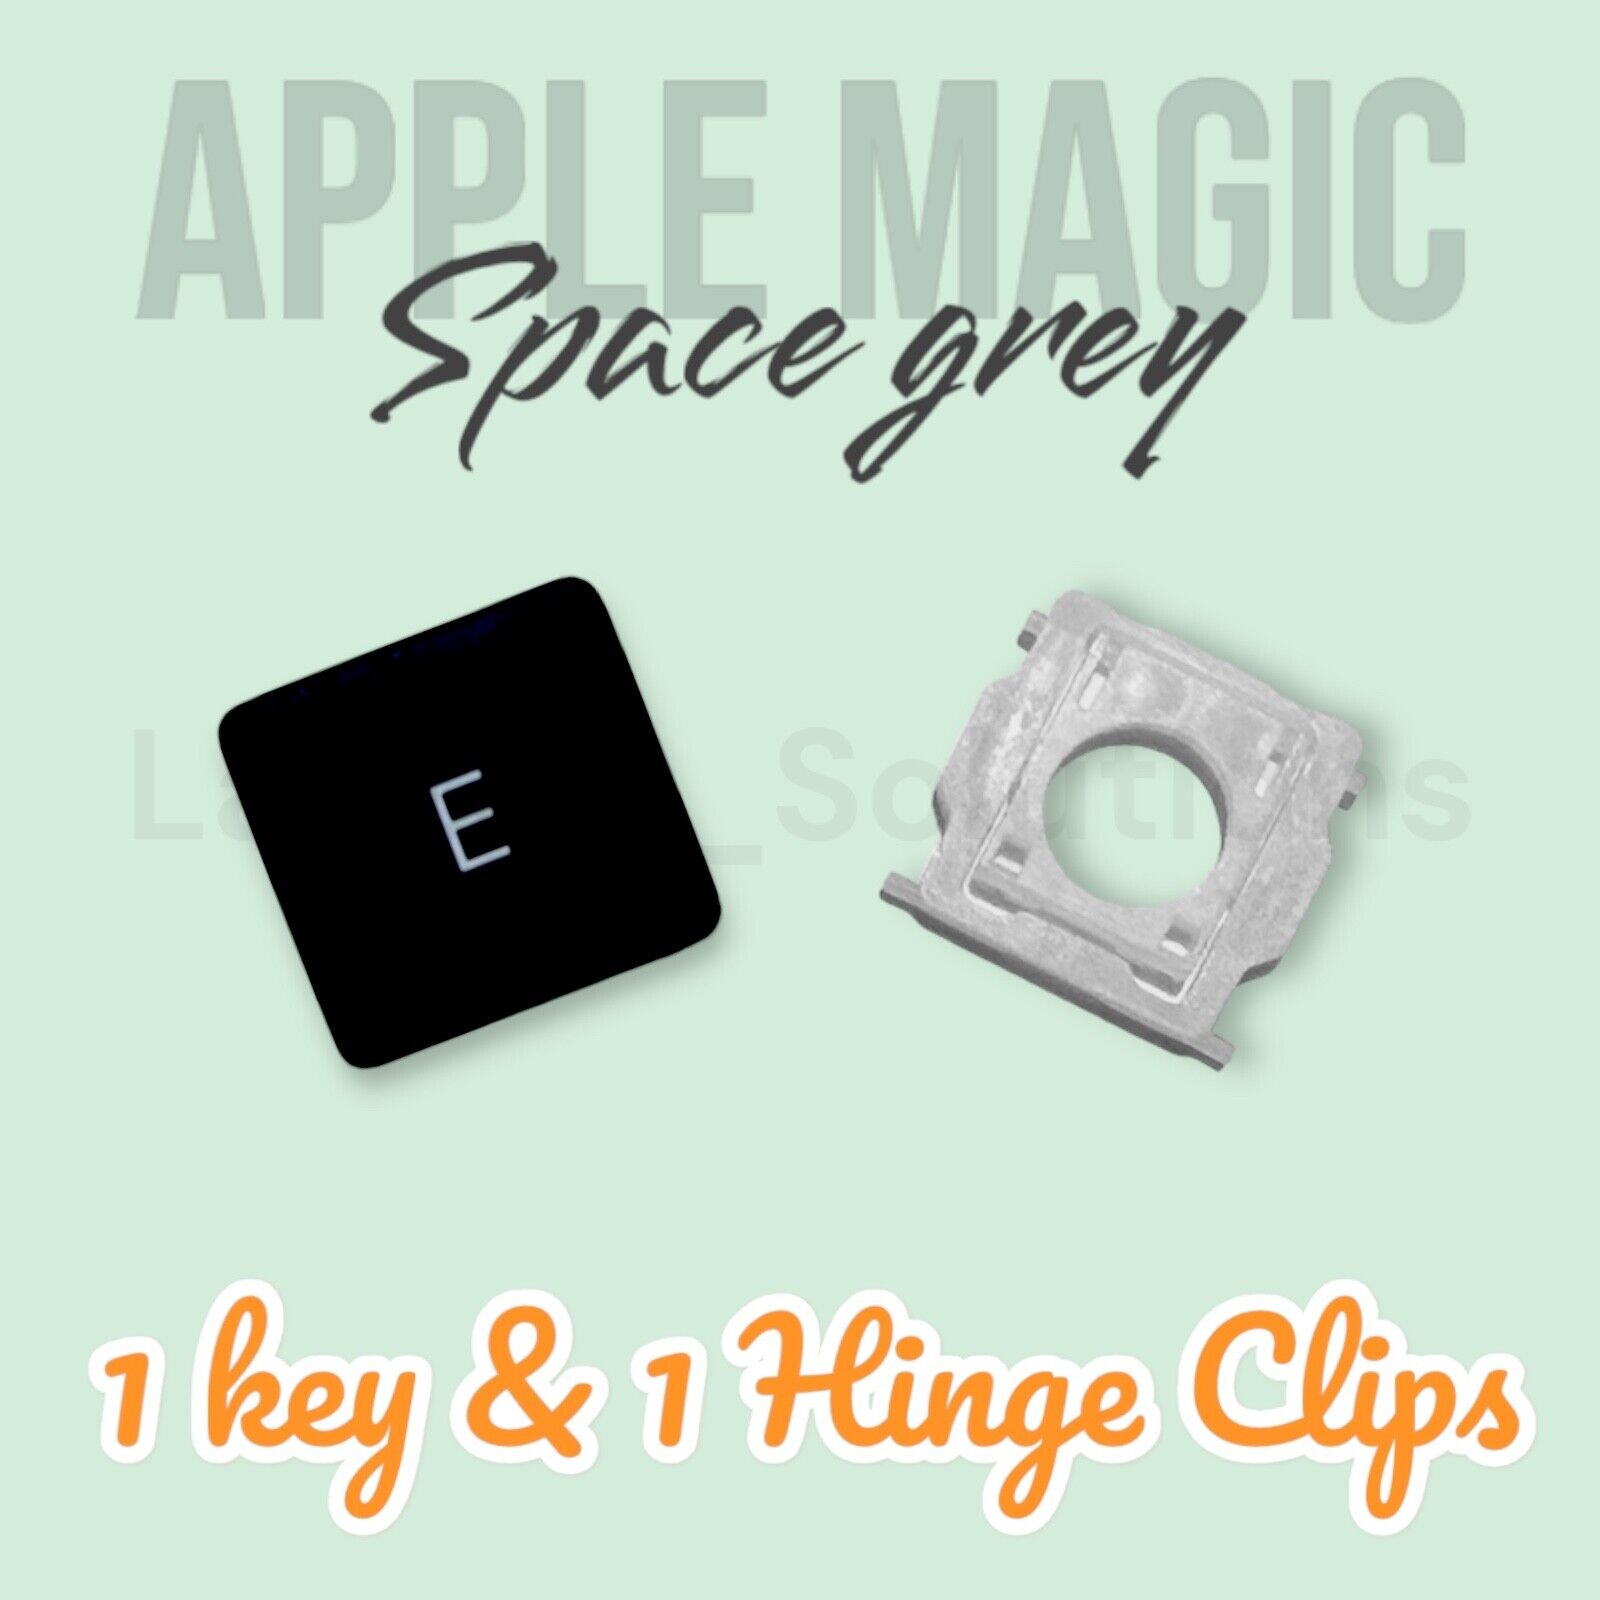 🍎 NEW - Apple Magic Keyboard A1843 - Space Grey ⚫️ Replacement Keys Hinges 🍎